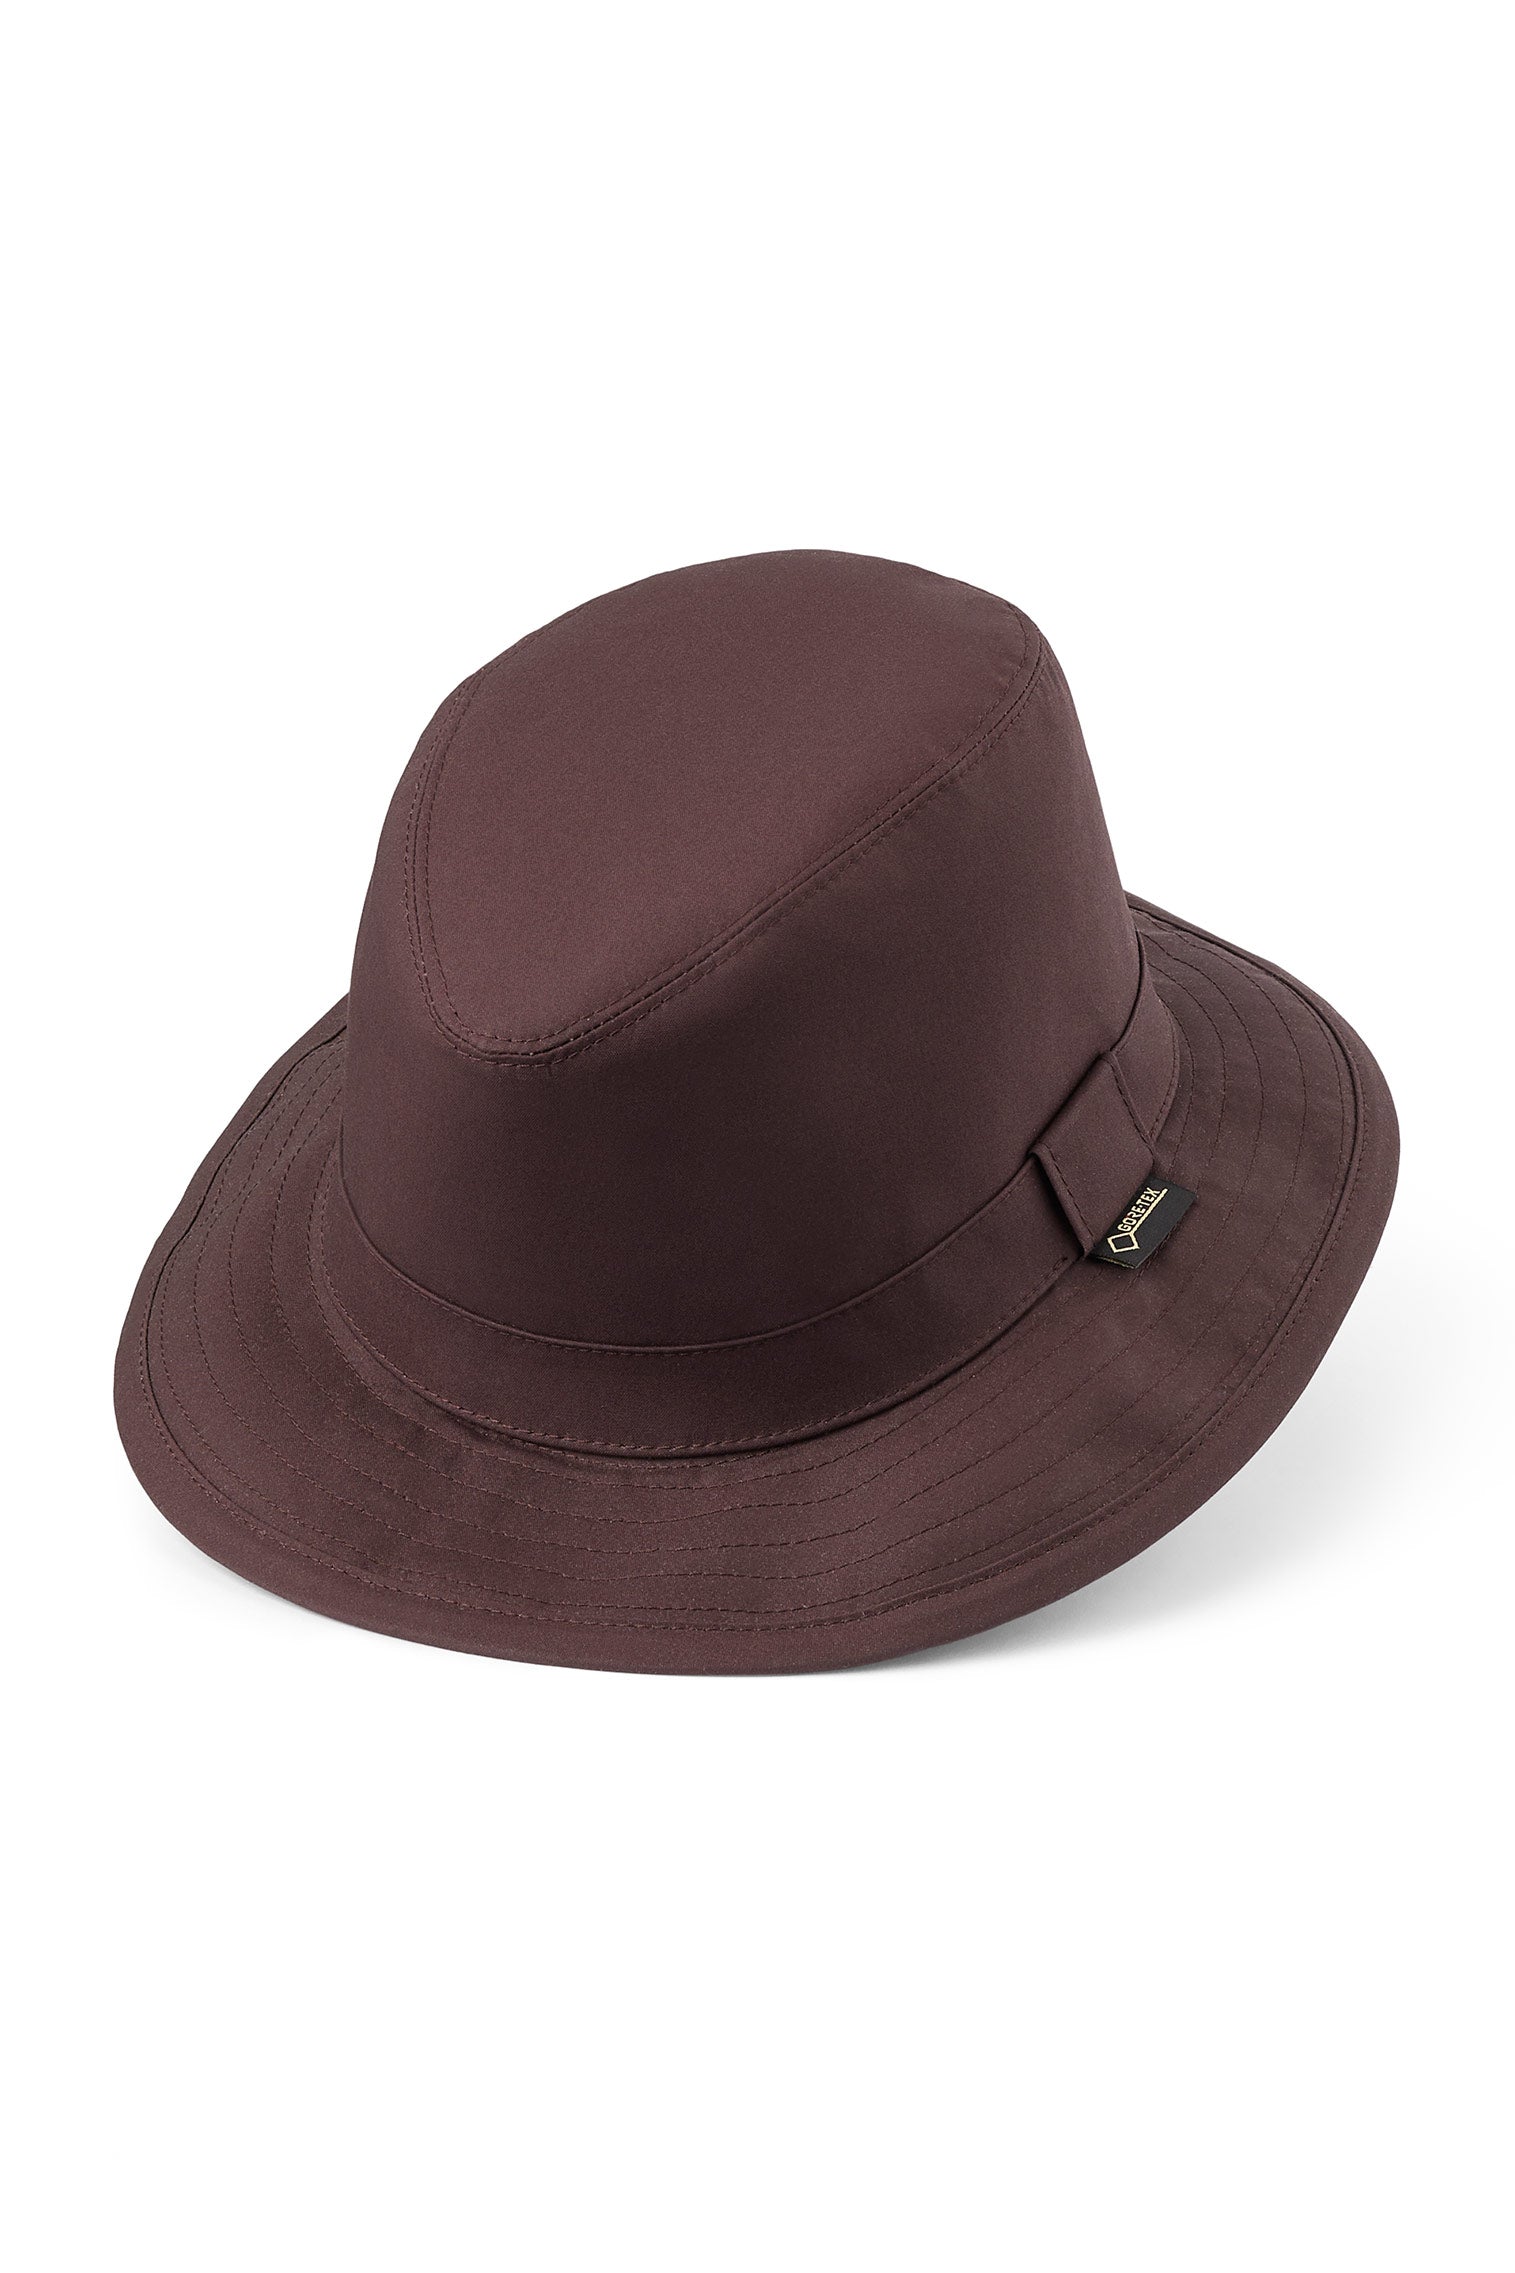 Tay GORE-TEX Hat - Hats for Square Face Shapes - Lock & Co. Hatters London UK